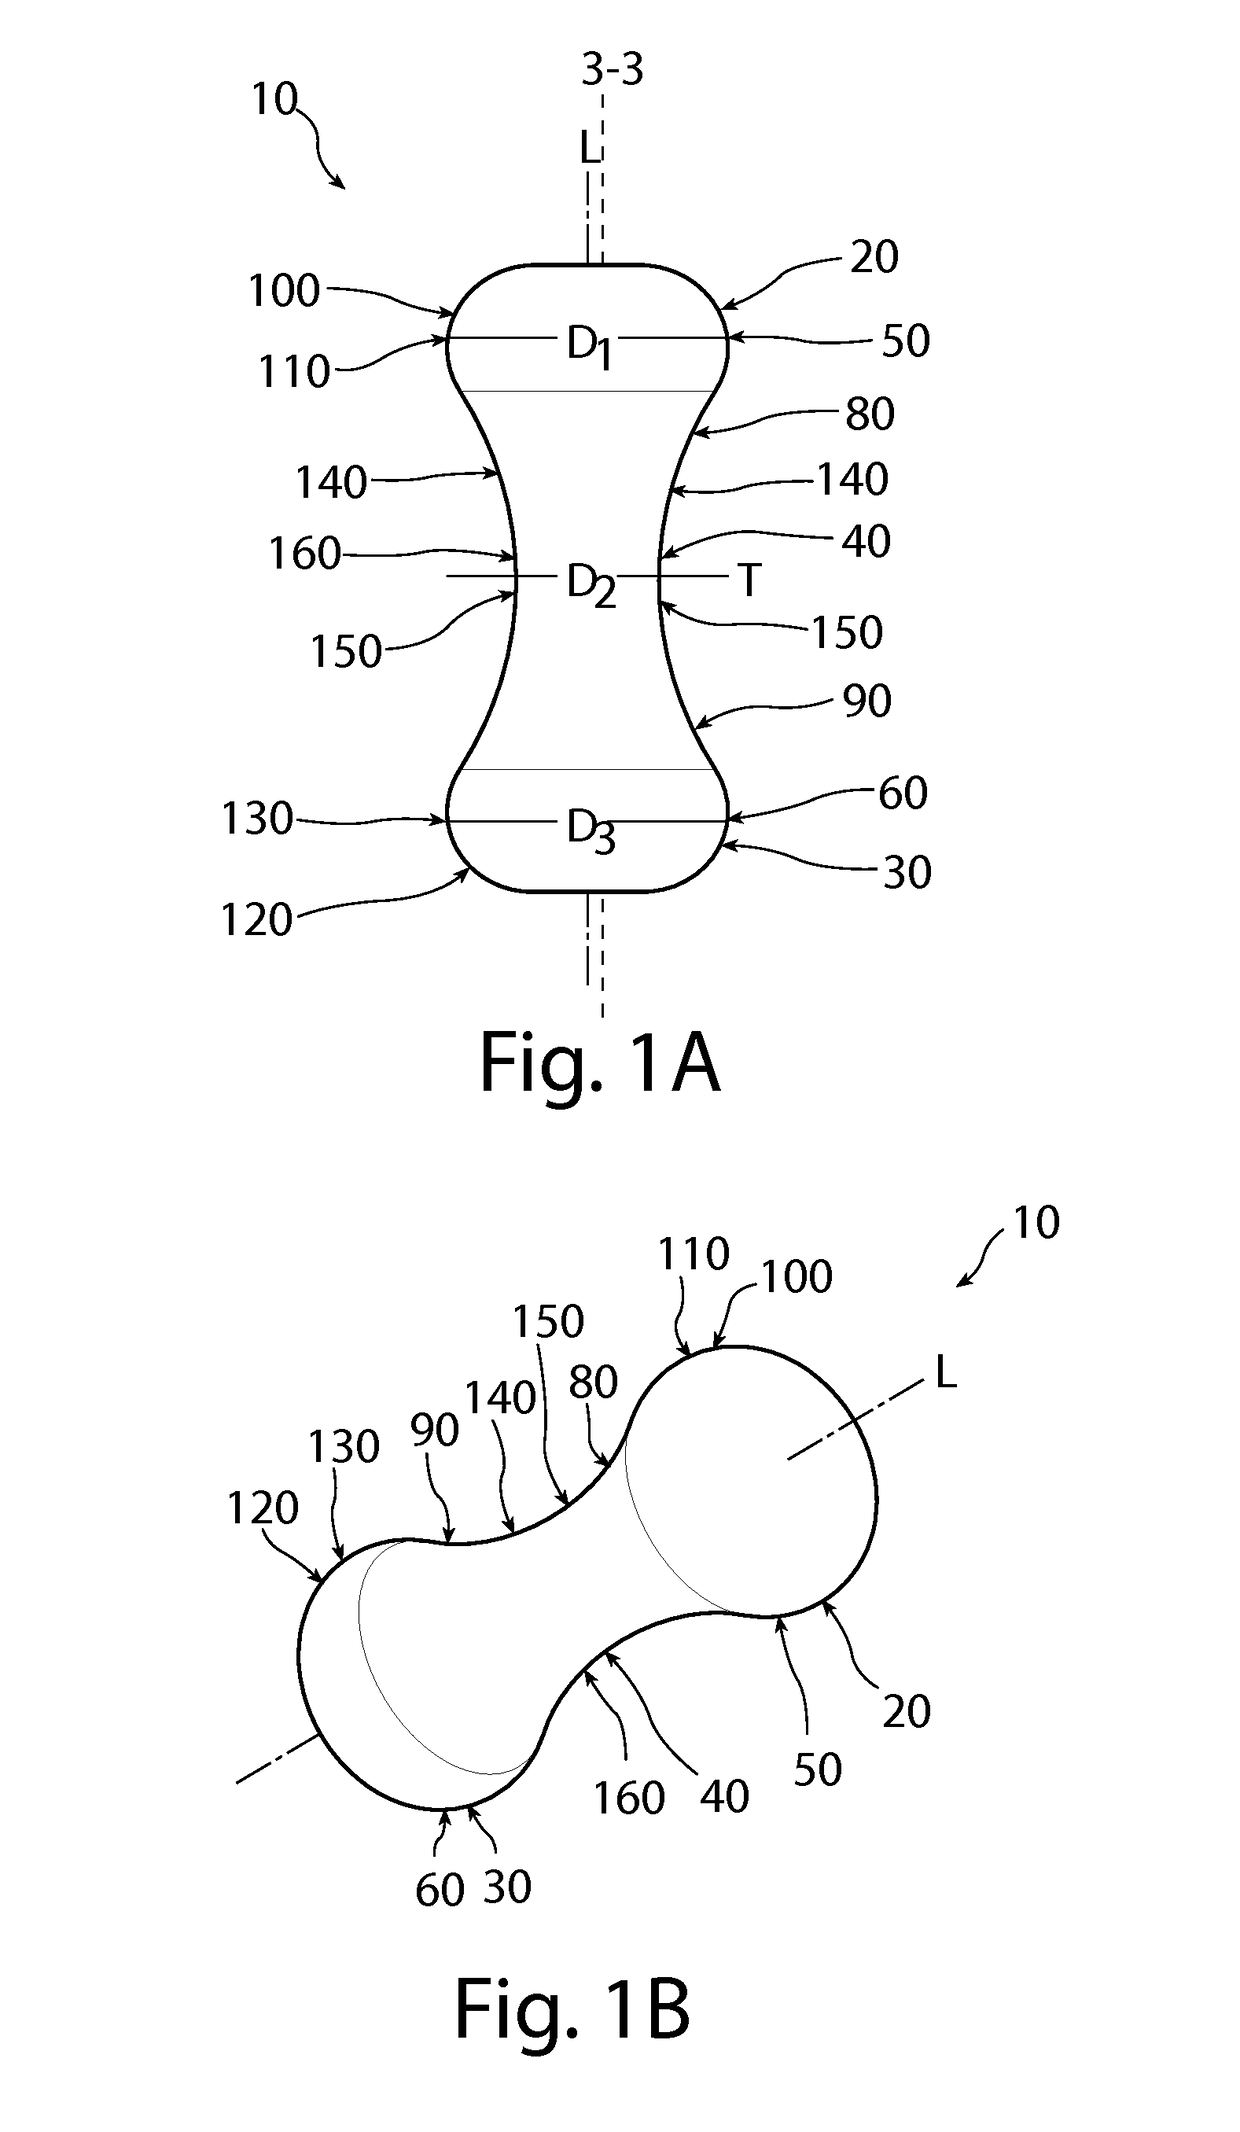 Method of conforming an overwrap to a pessary device